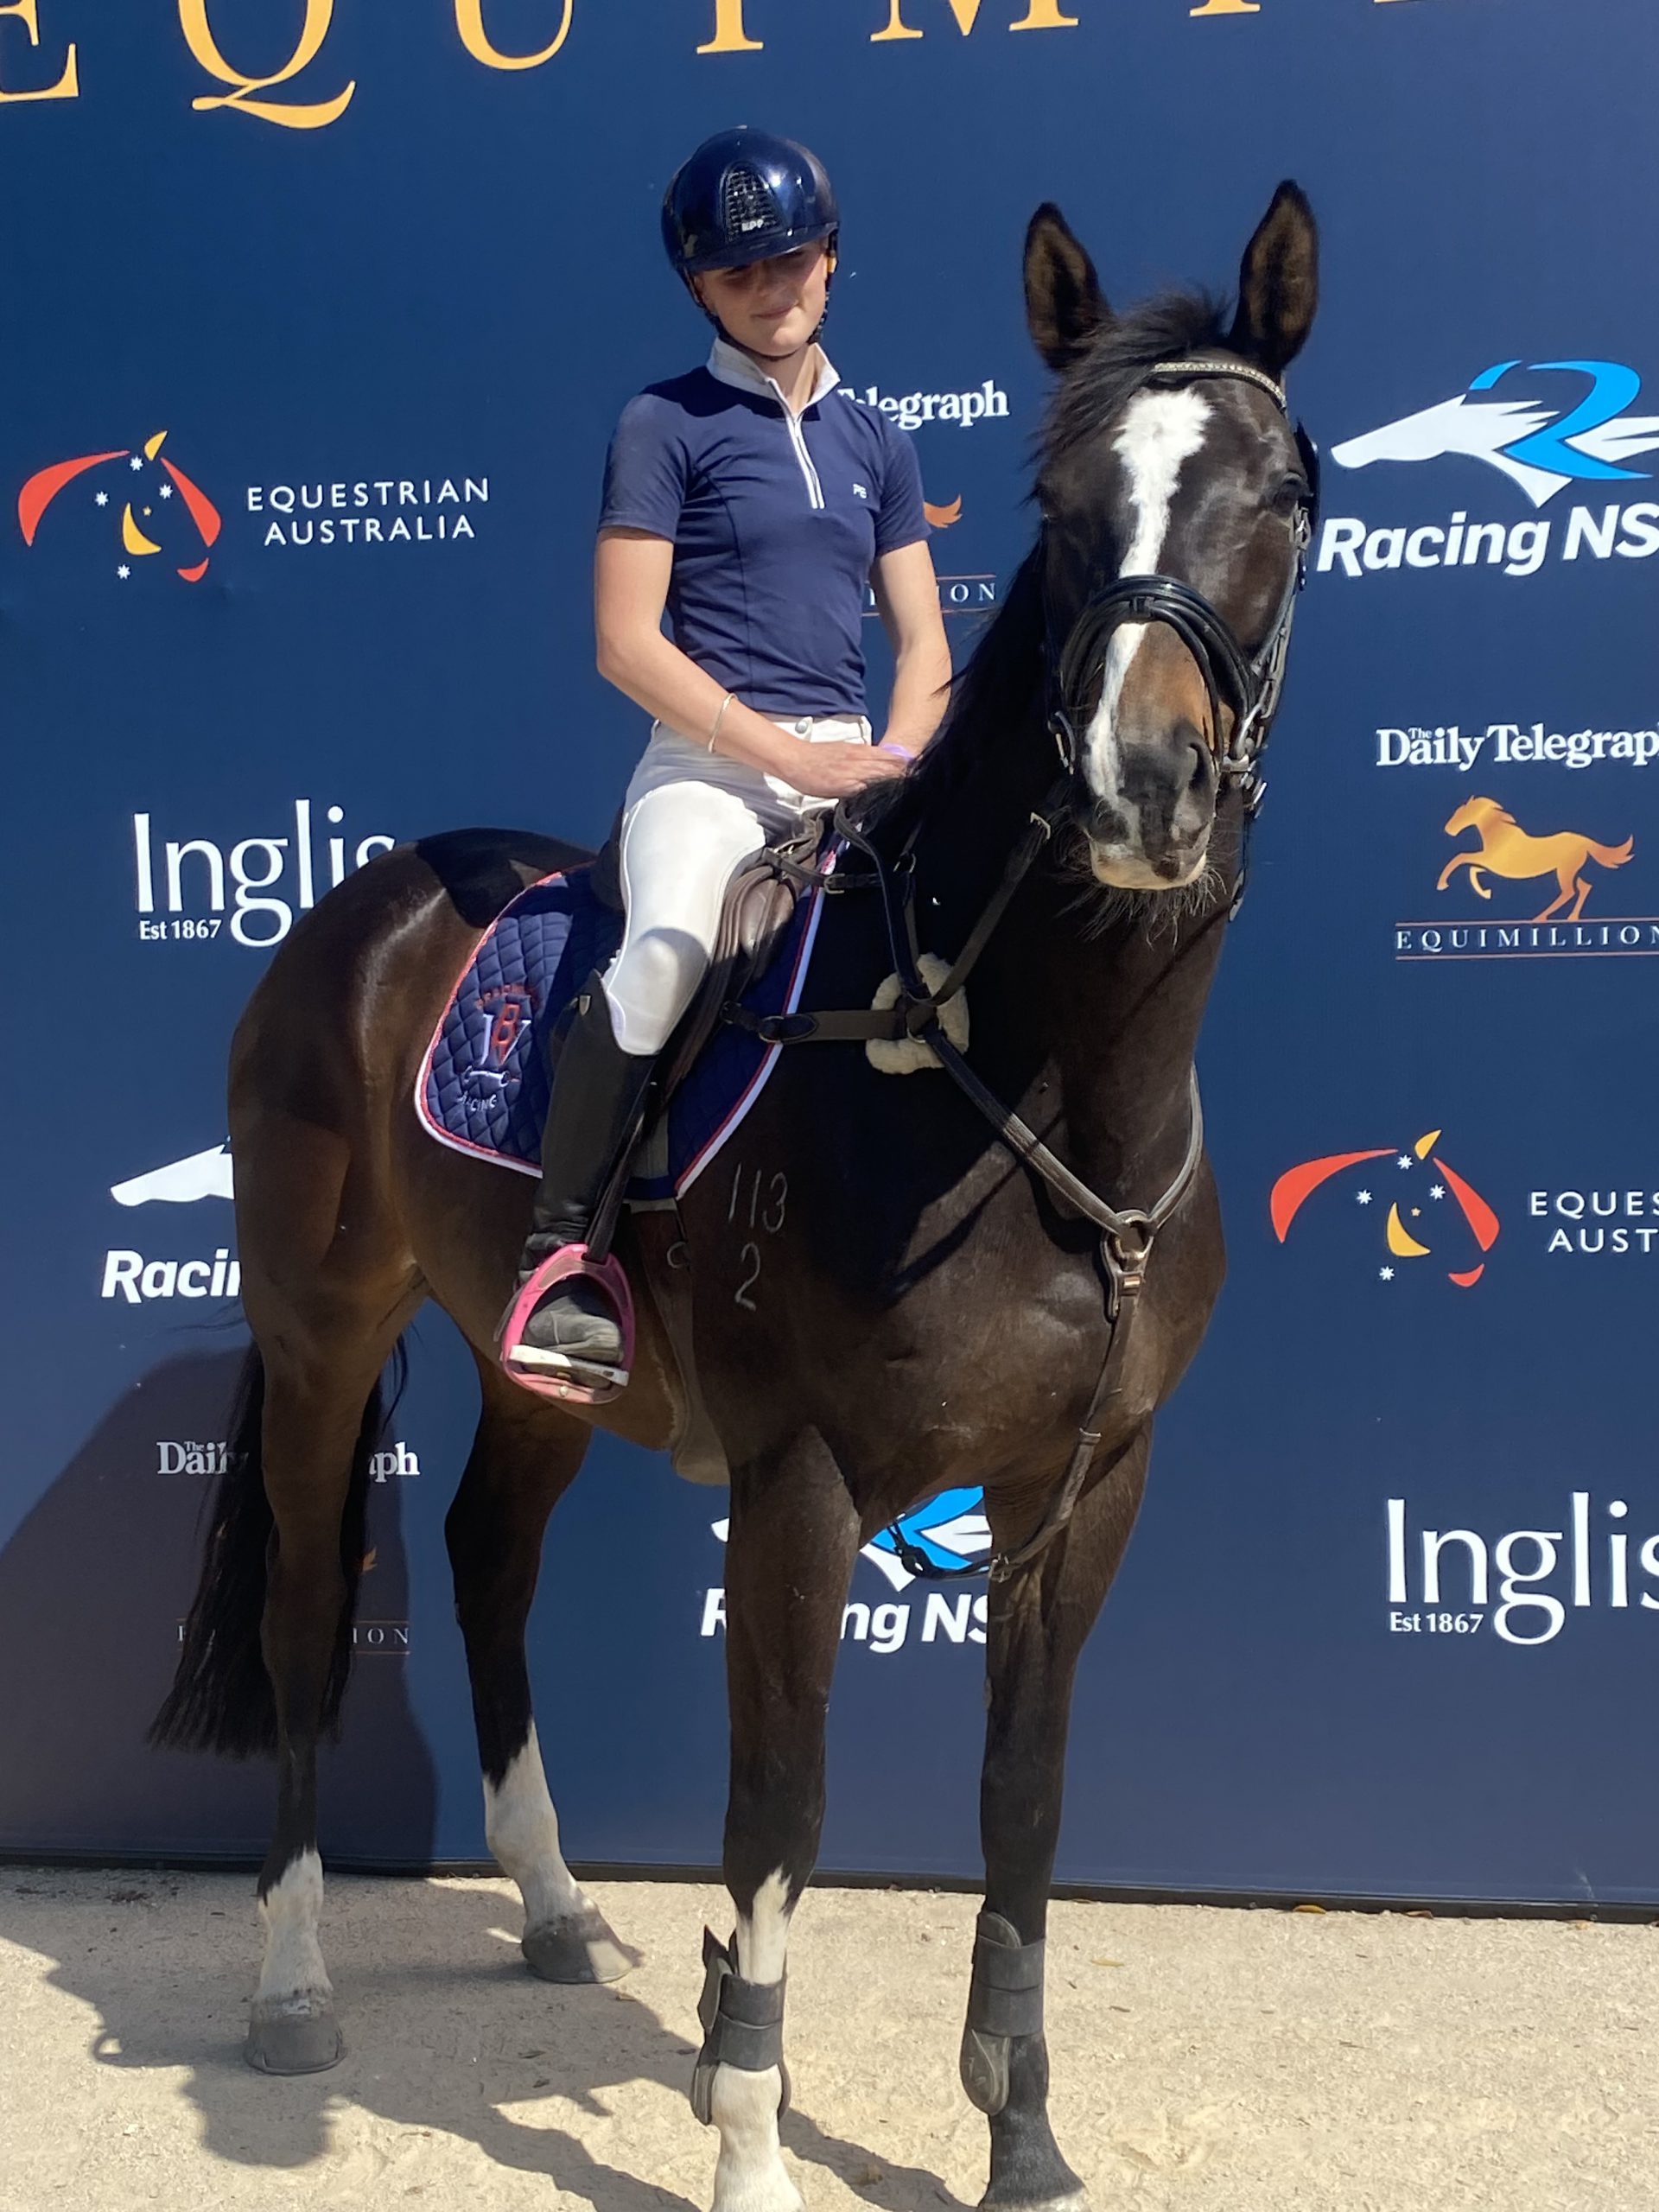 Poppie Gorton: From Rocking Horses to Racetracks, Chasing Dreams in the Saddle!